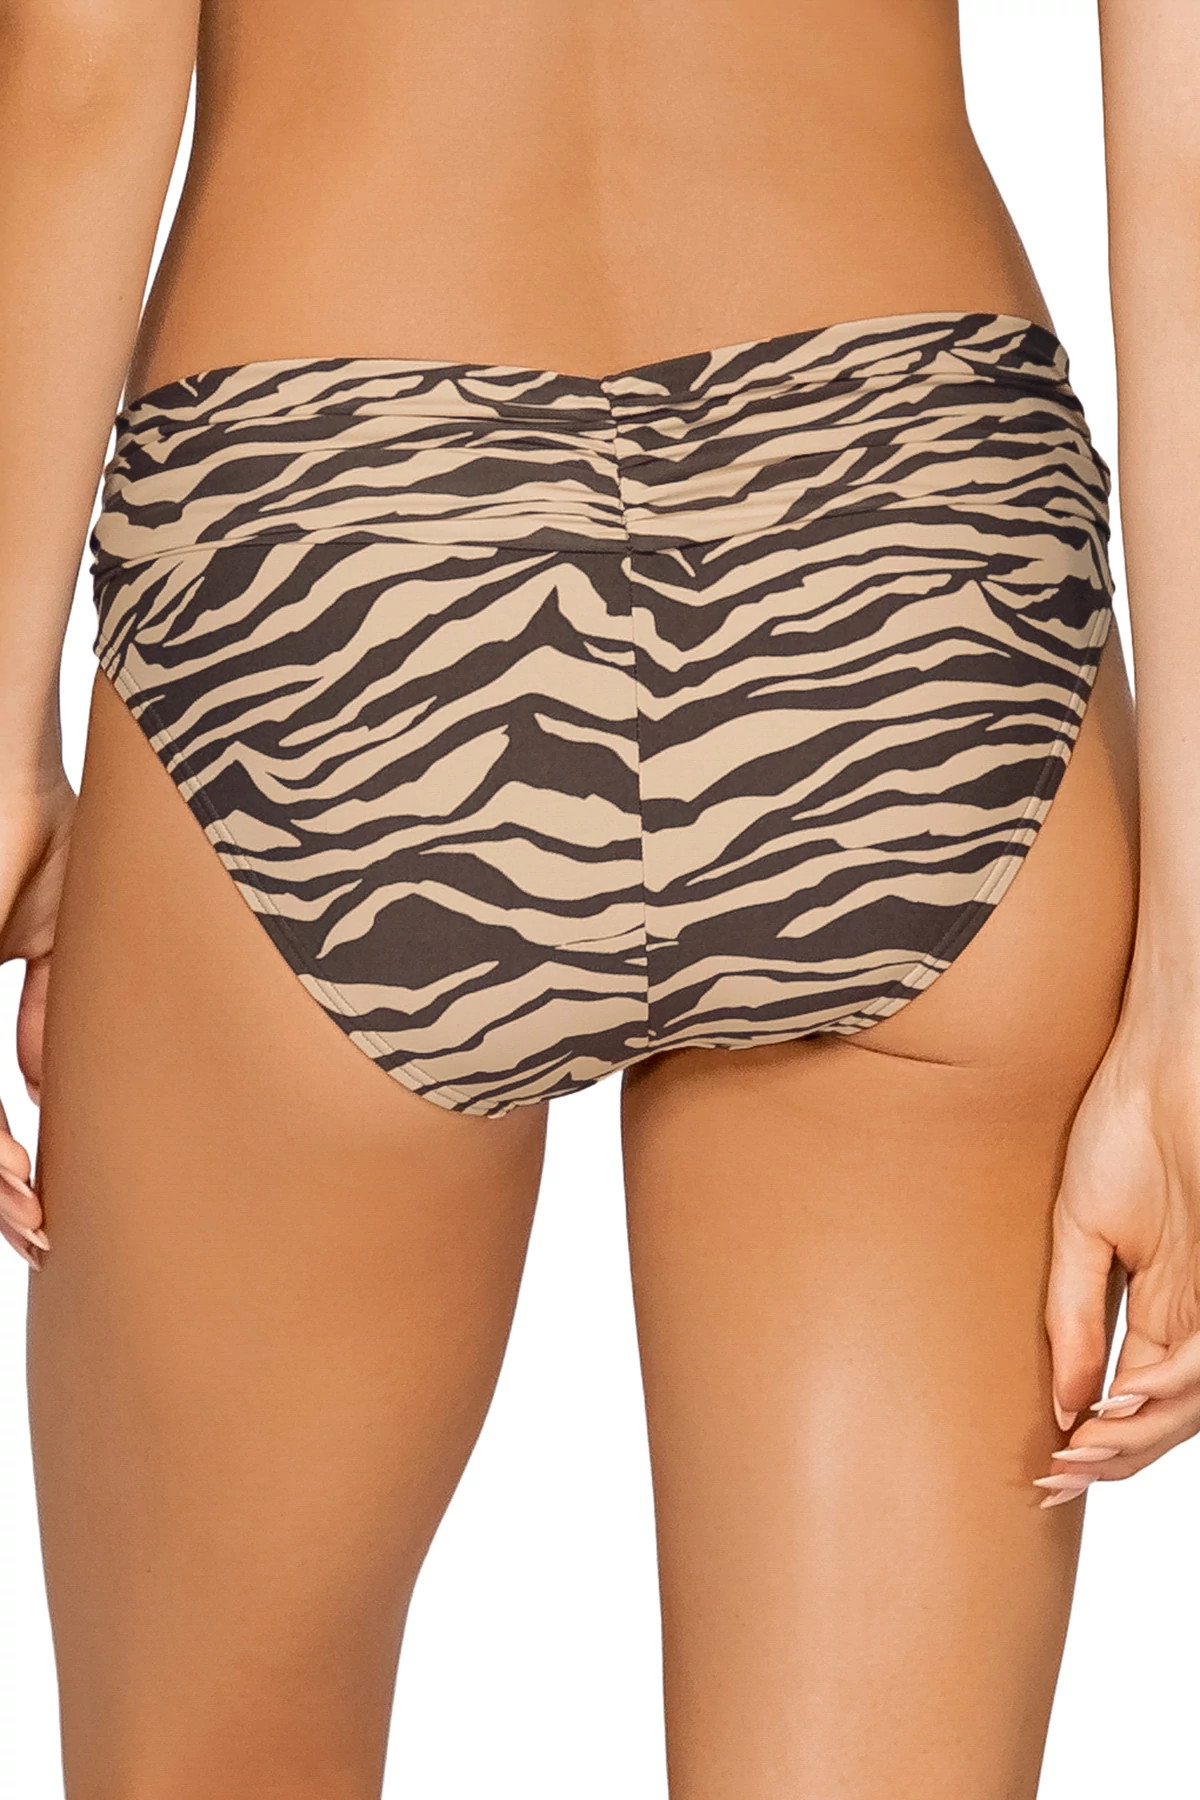 ON THE PROWL Unforgettable Banded Hipster Bikini Bottom image number 2